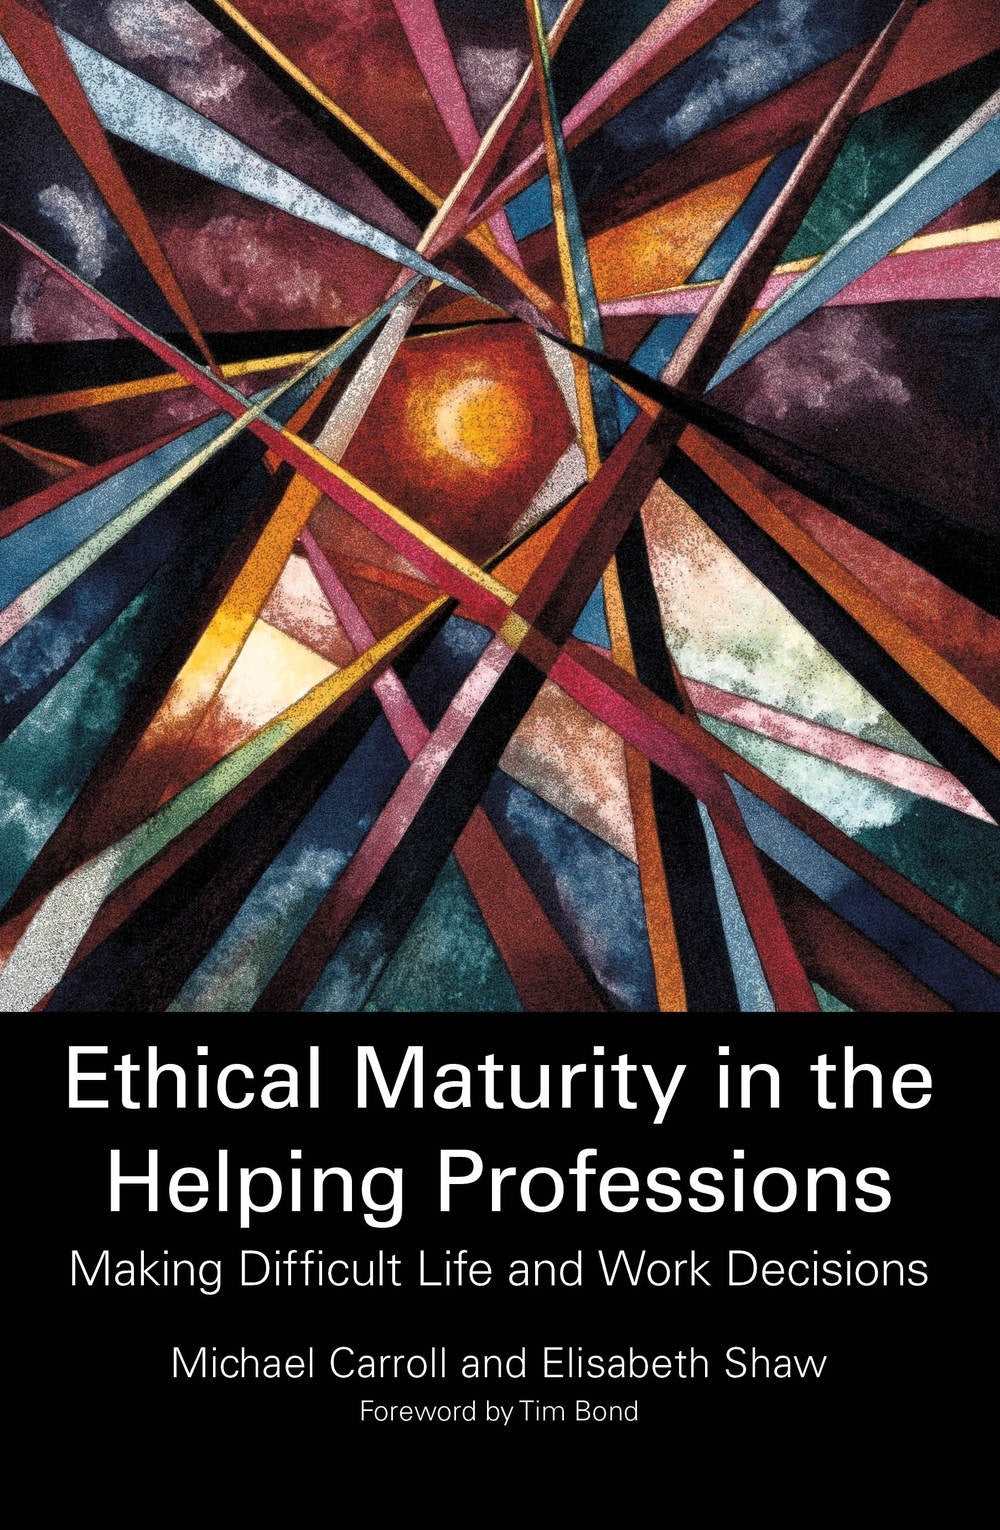 Ethical Maturity in the Helping Professions by Elisabeth Shaw, Dr Michael Carroll